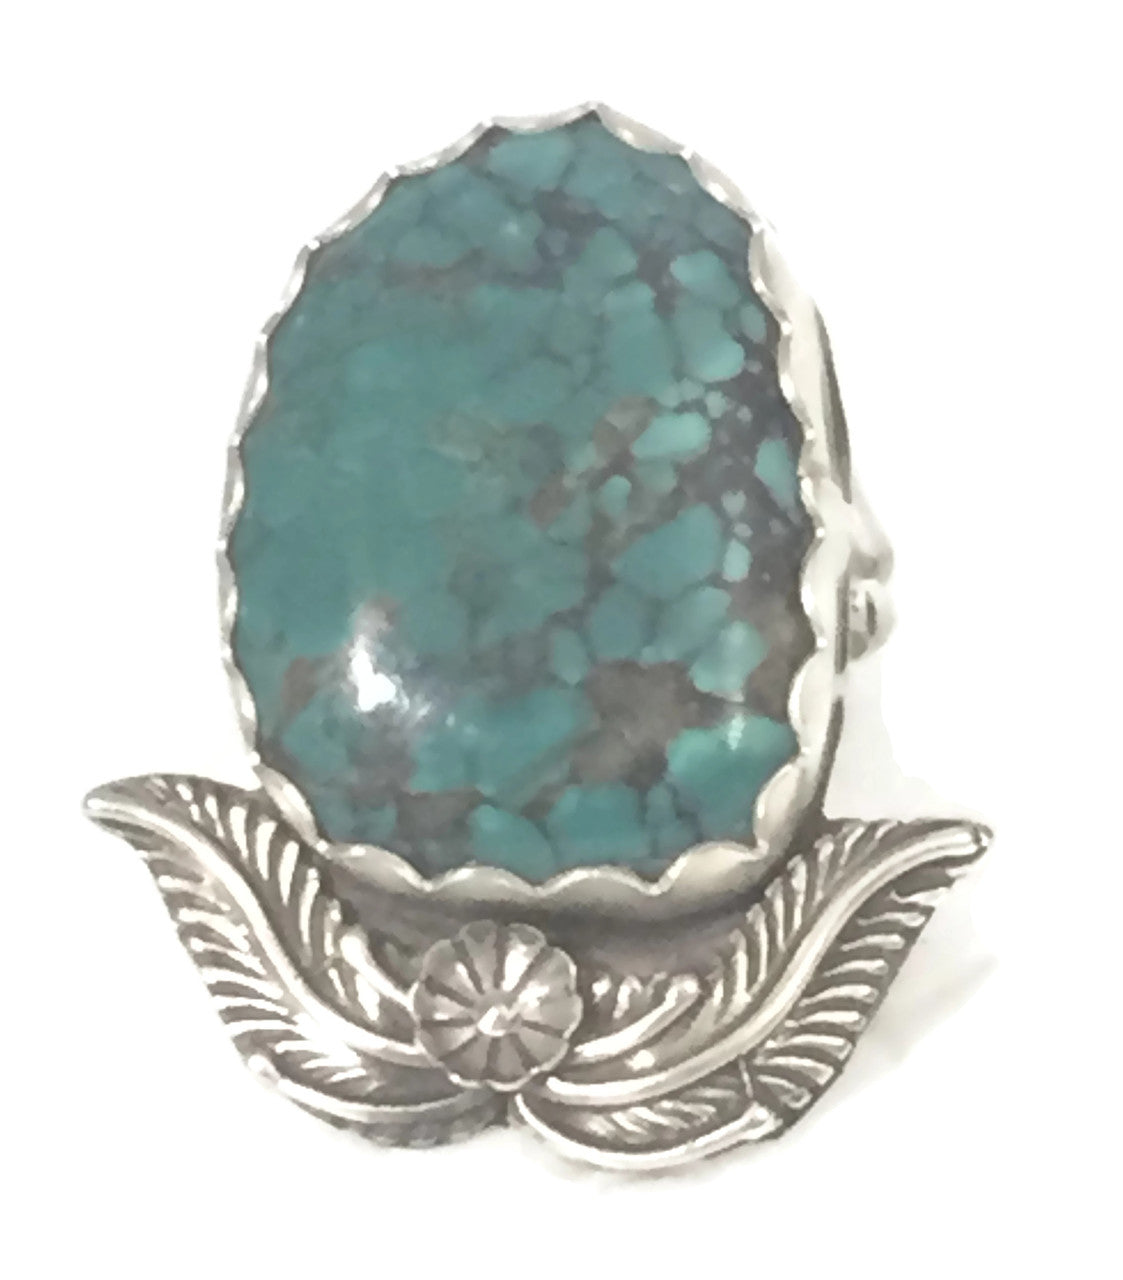 Navajo Turquoise Ring Sterling Silver Size 7 Signed